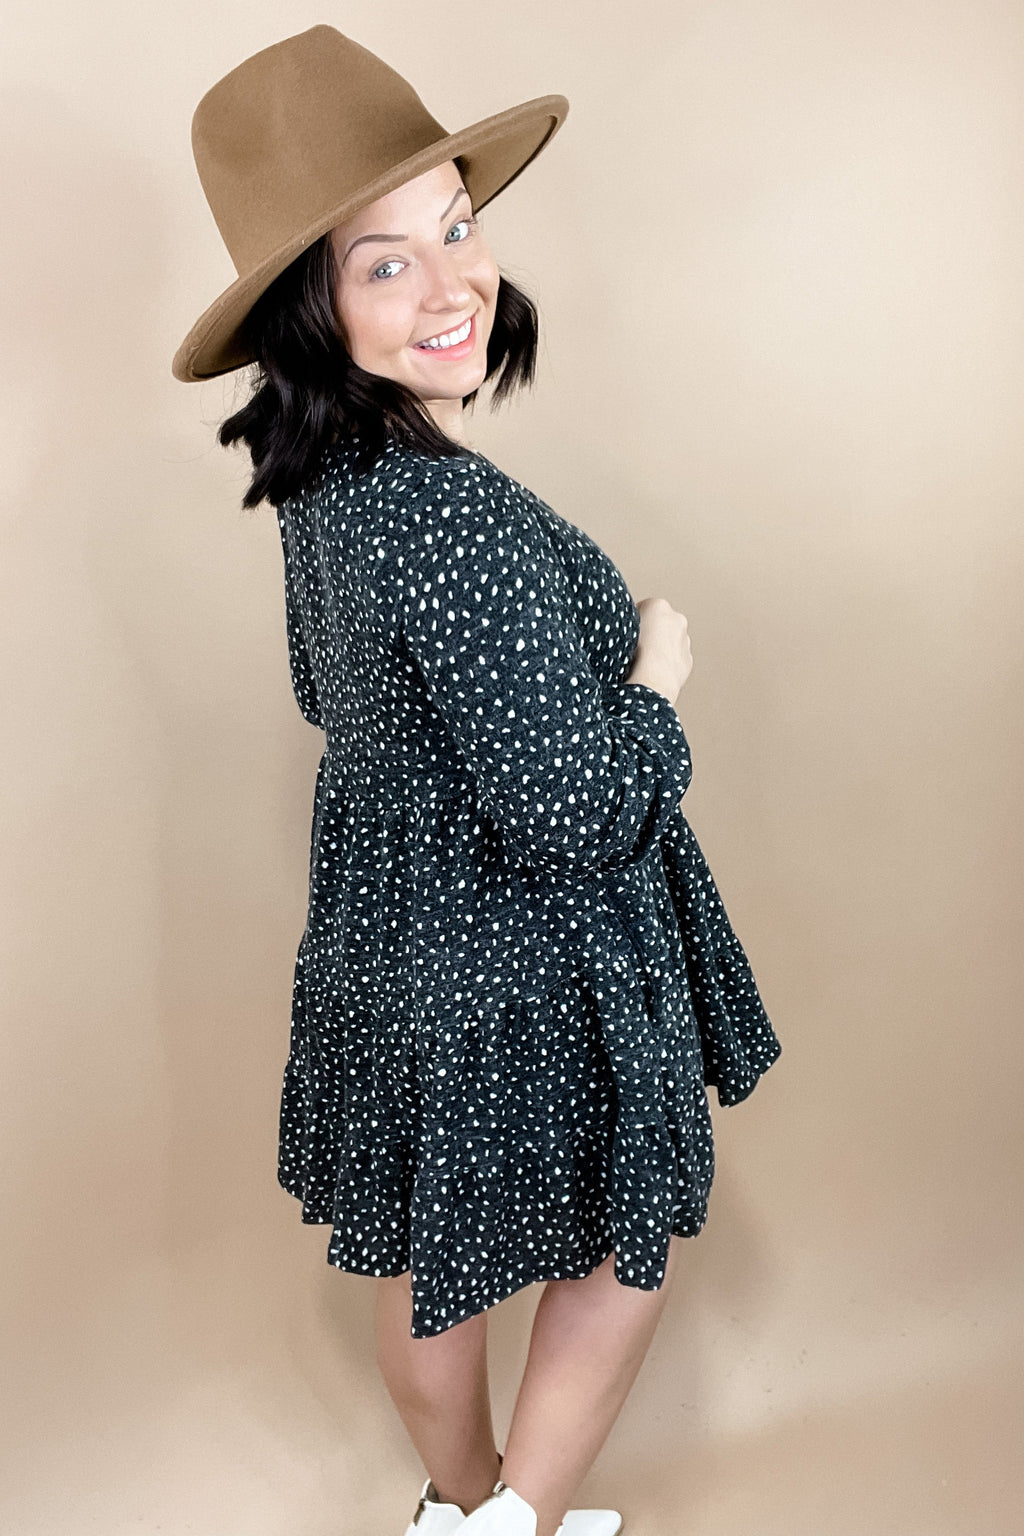 For The Moment- Charcoal & White Speckled Print Long Sleeve Button Up Dress